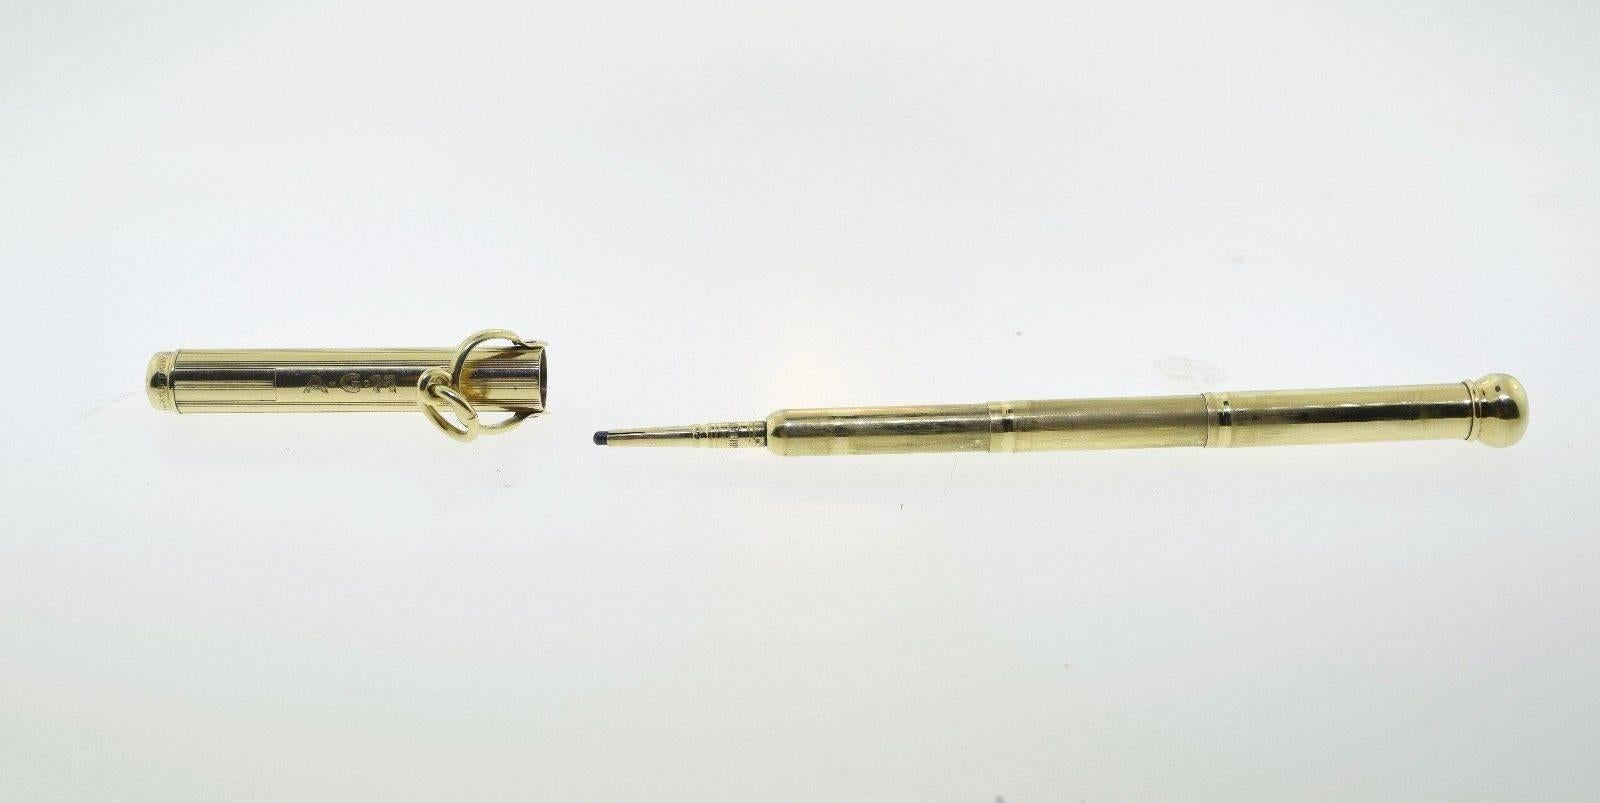 100% guaranteed authentic Tiffany & Co. antique 14k yellow gold telescoping mechanical pencil pendant measuring 2.25 inches closed and 4.25 inches open. The pencil is in great condition, especially considering its age. It is engraved A G M and